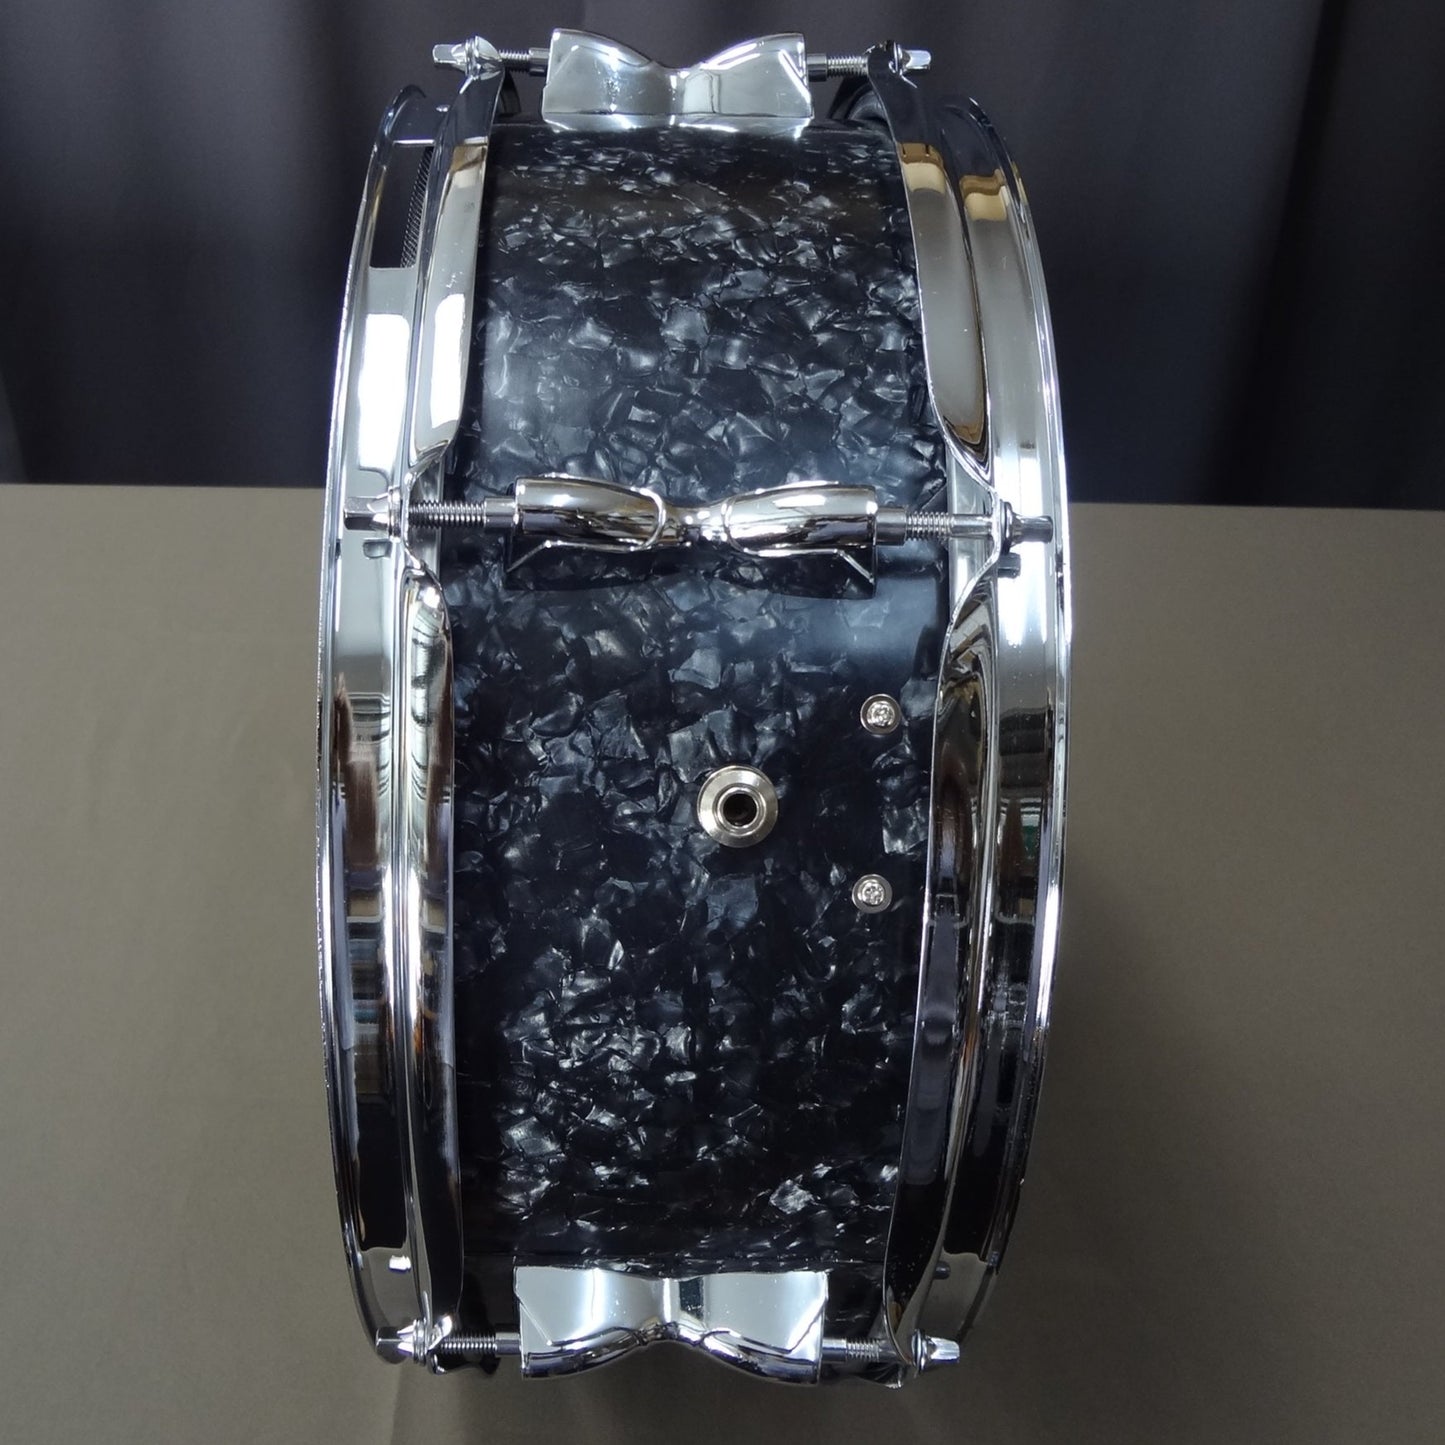 New 14 Inch Custom Electronic Snare Drum - Black Pearl Small Diamond